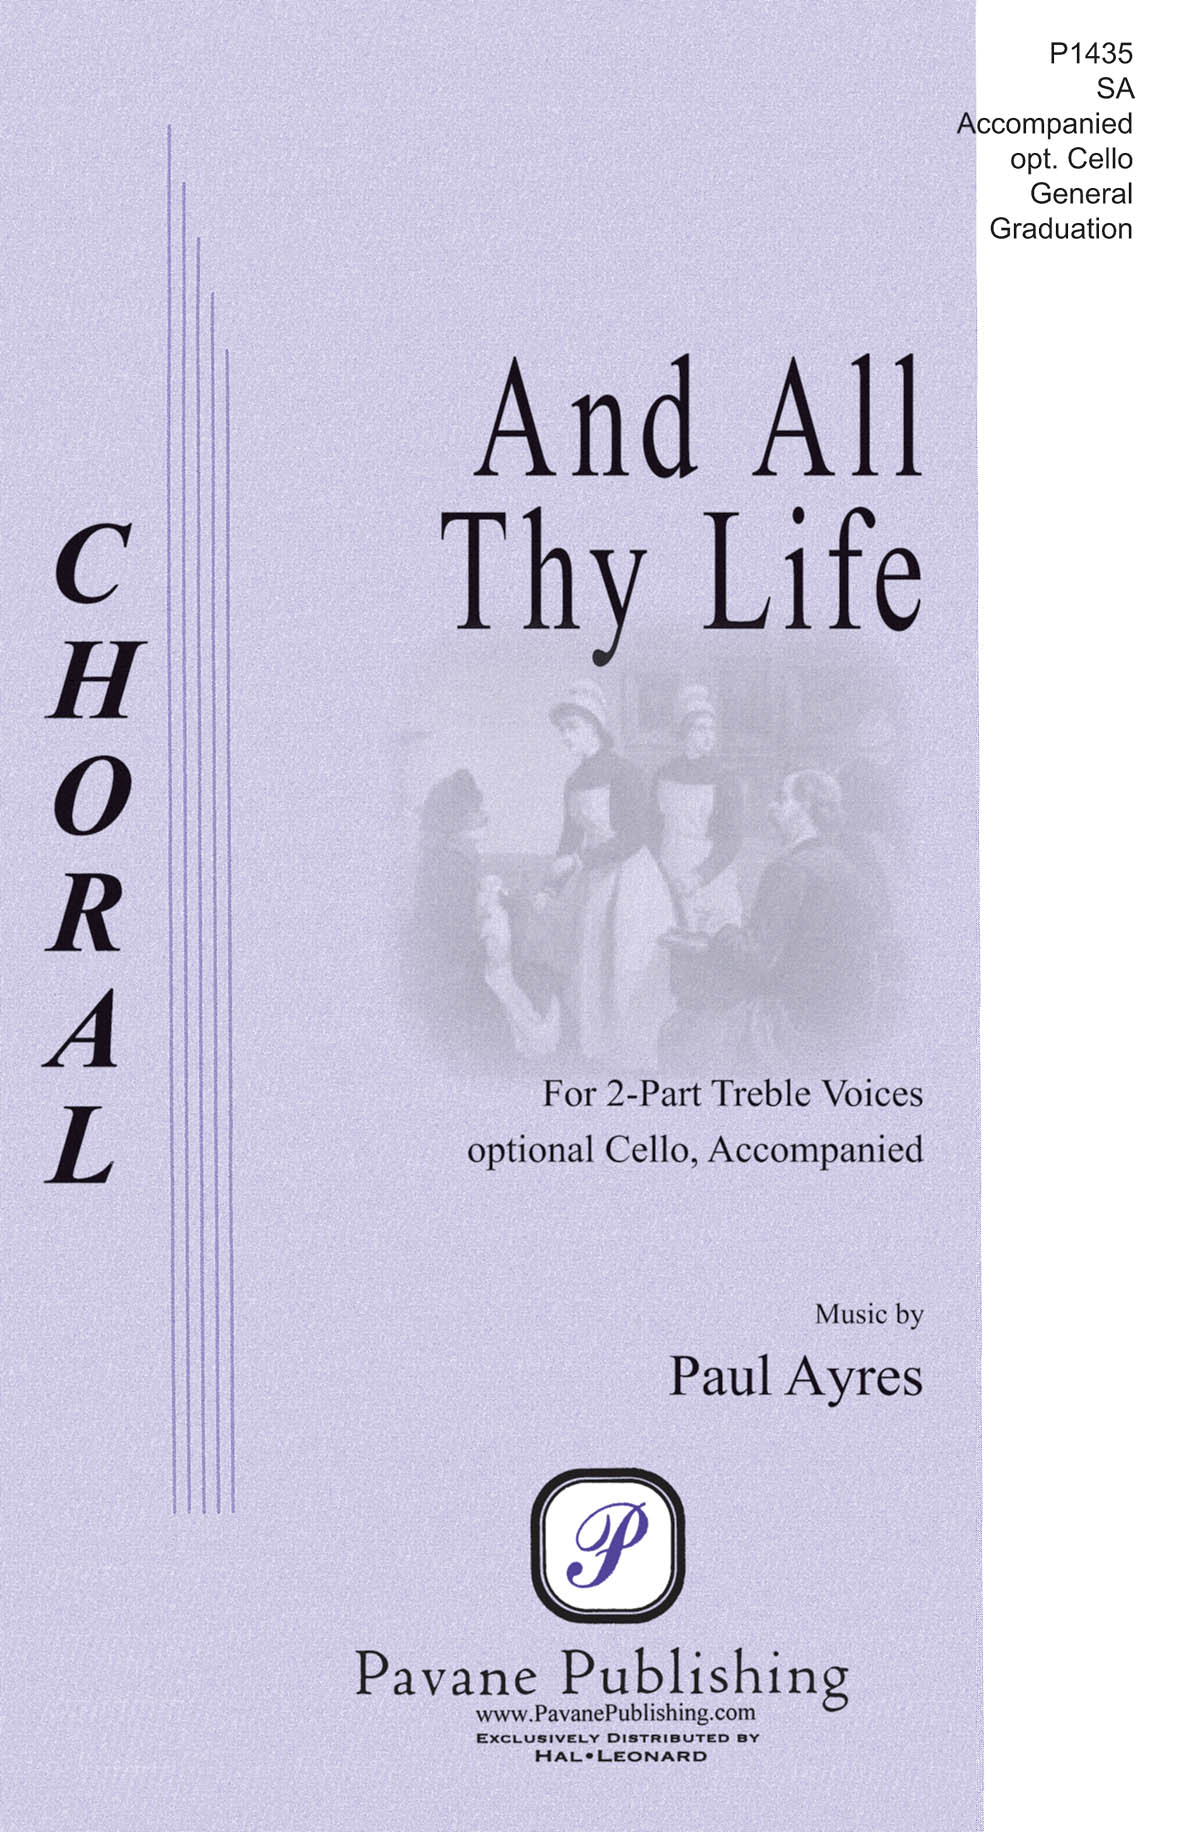 Paul Ayres: And All Thy Life: Mixed Choir a Cappella: Vocal Score